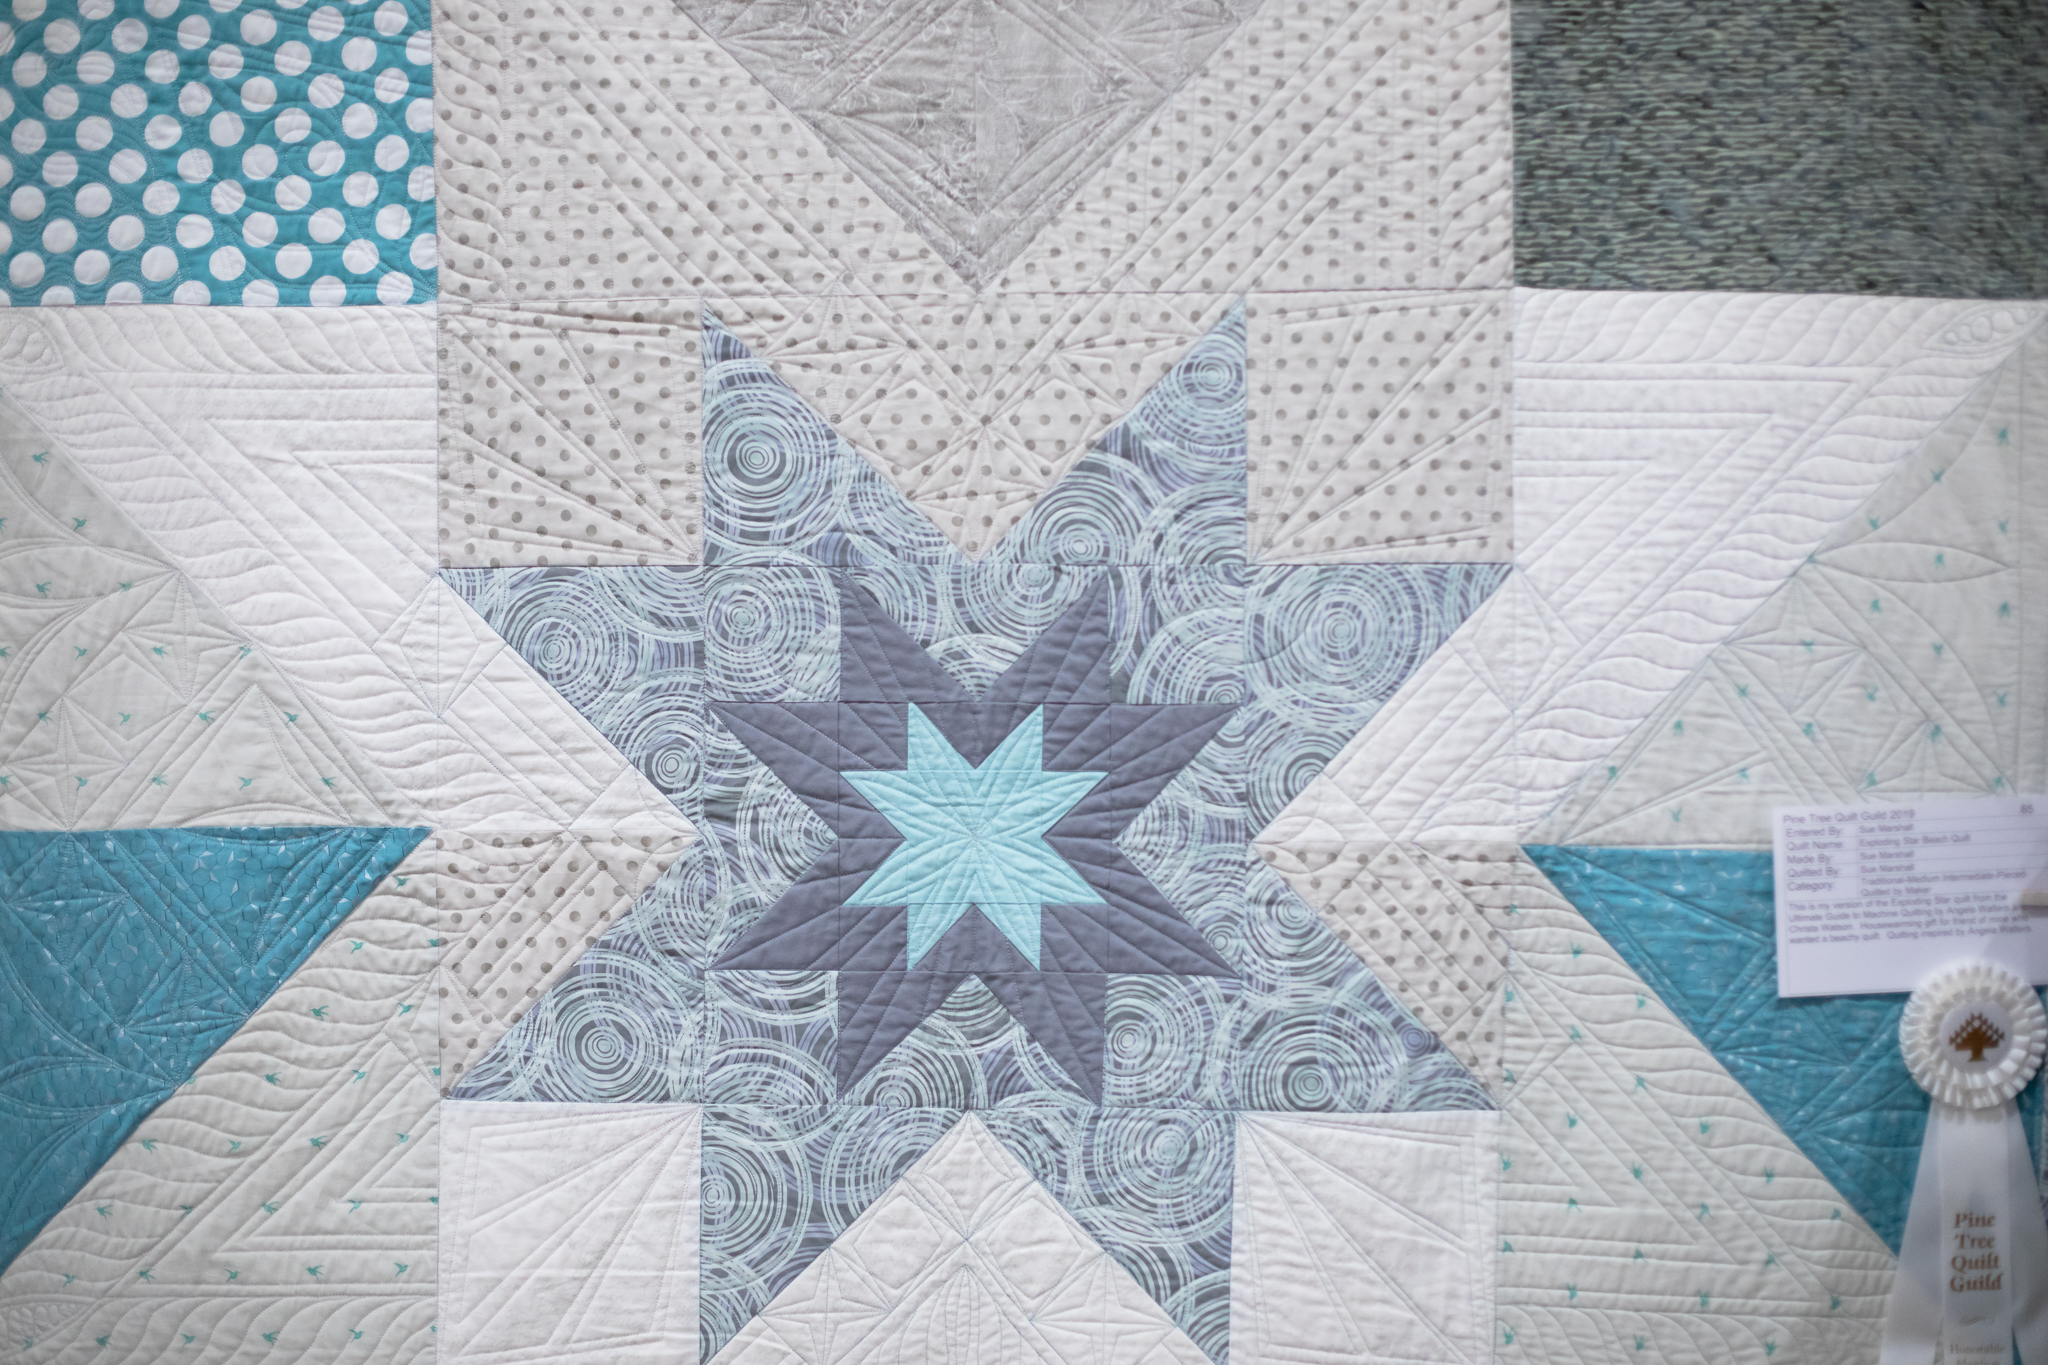 Pine Tree Quilt Show at the Nevada County Fairgrounds | Pine Tre